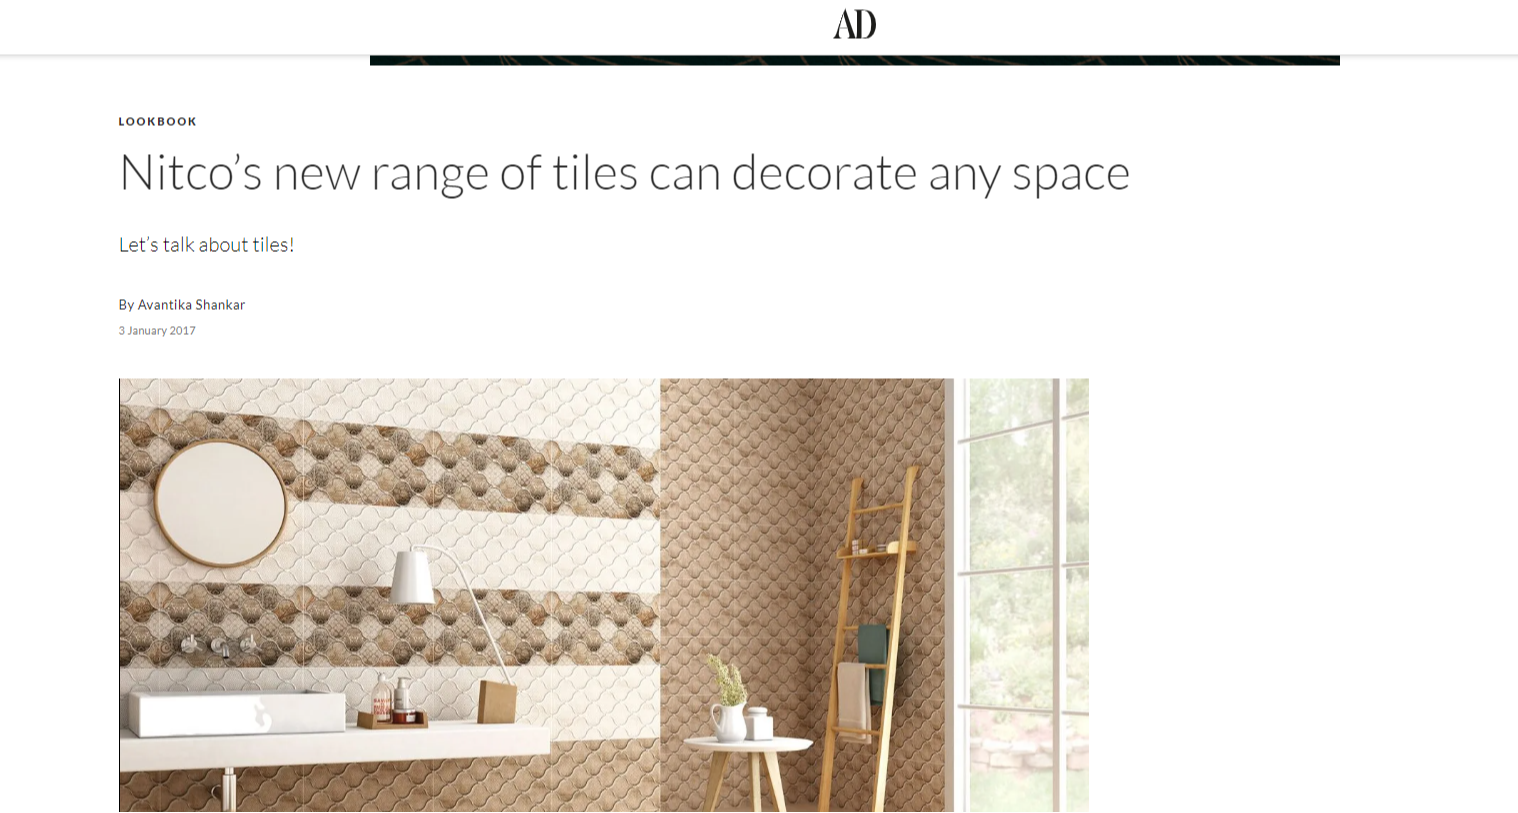 Nitco’s new range of tiles can decorate any space 1226